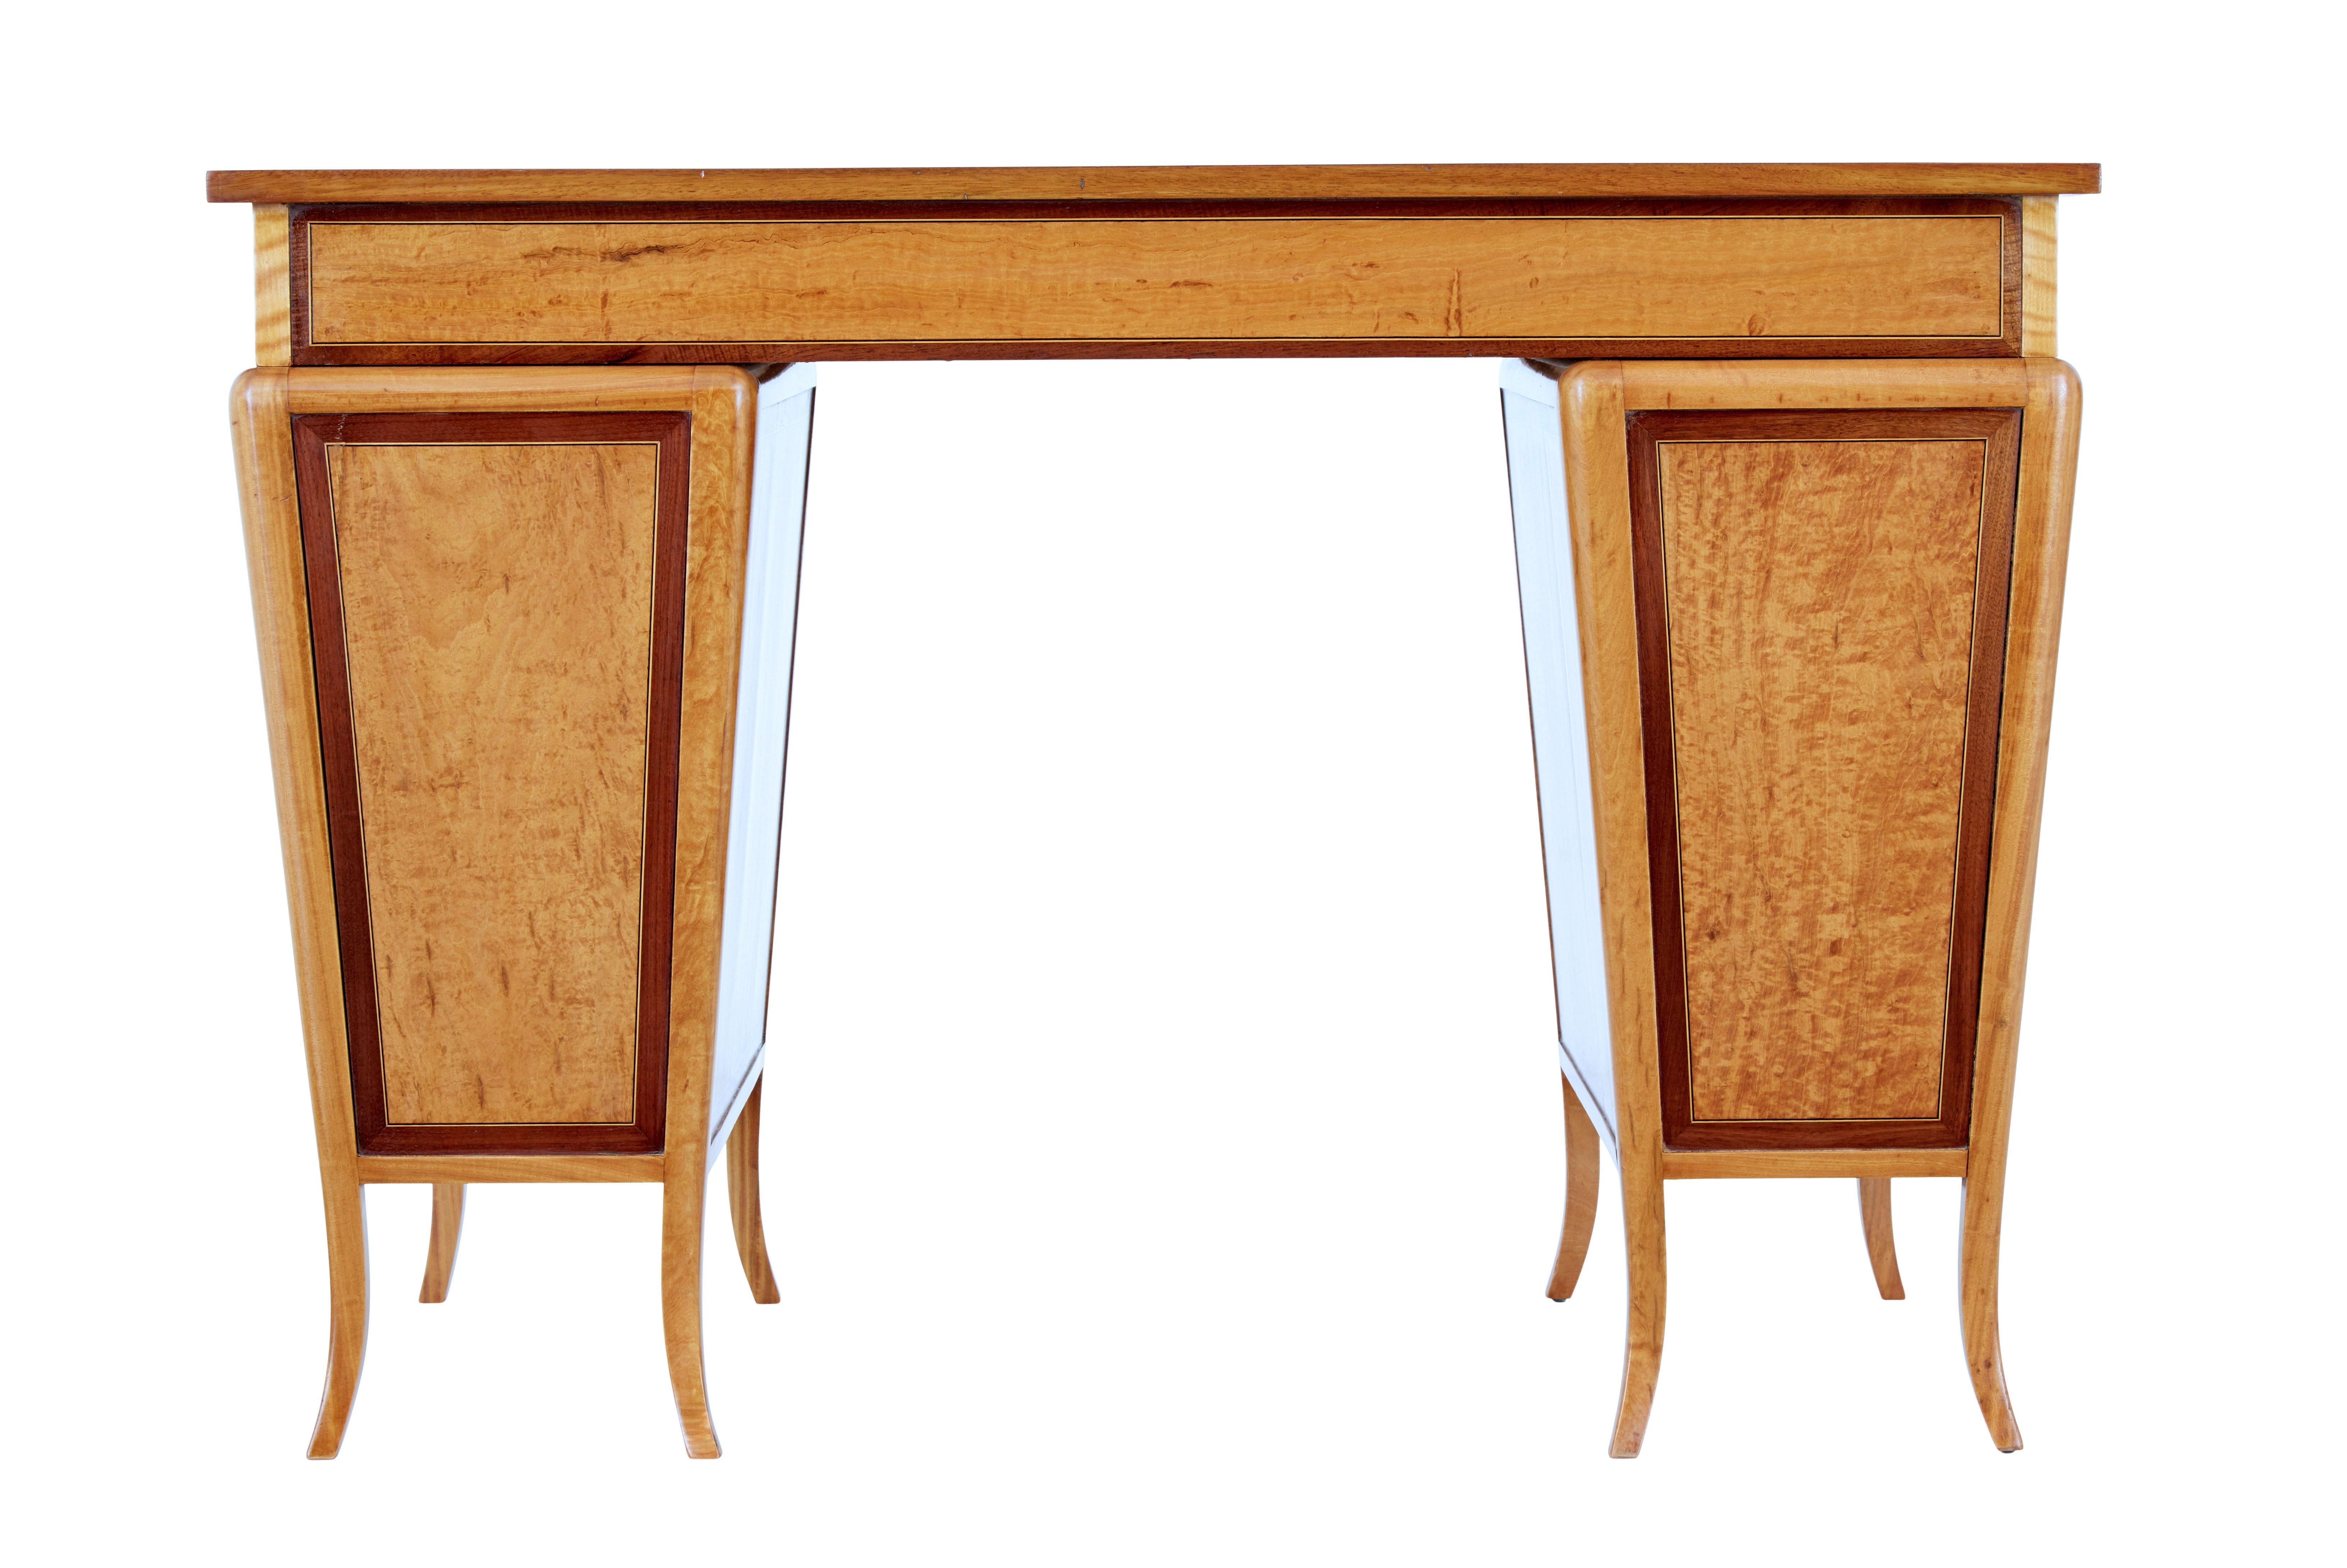 Early 20th Century Satinwood Sheraton Revival Desk In Good Condition In Debenham, Suffolk